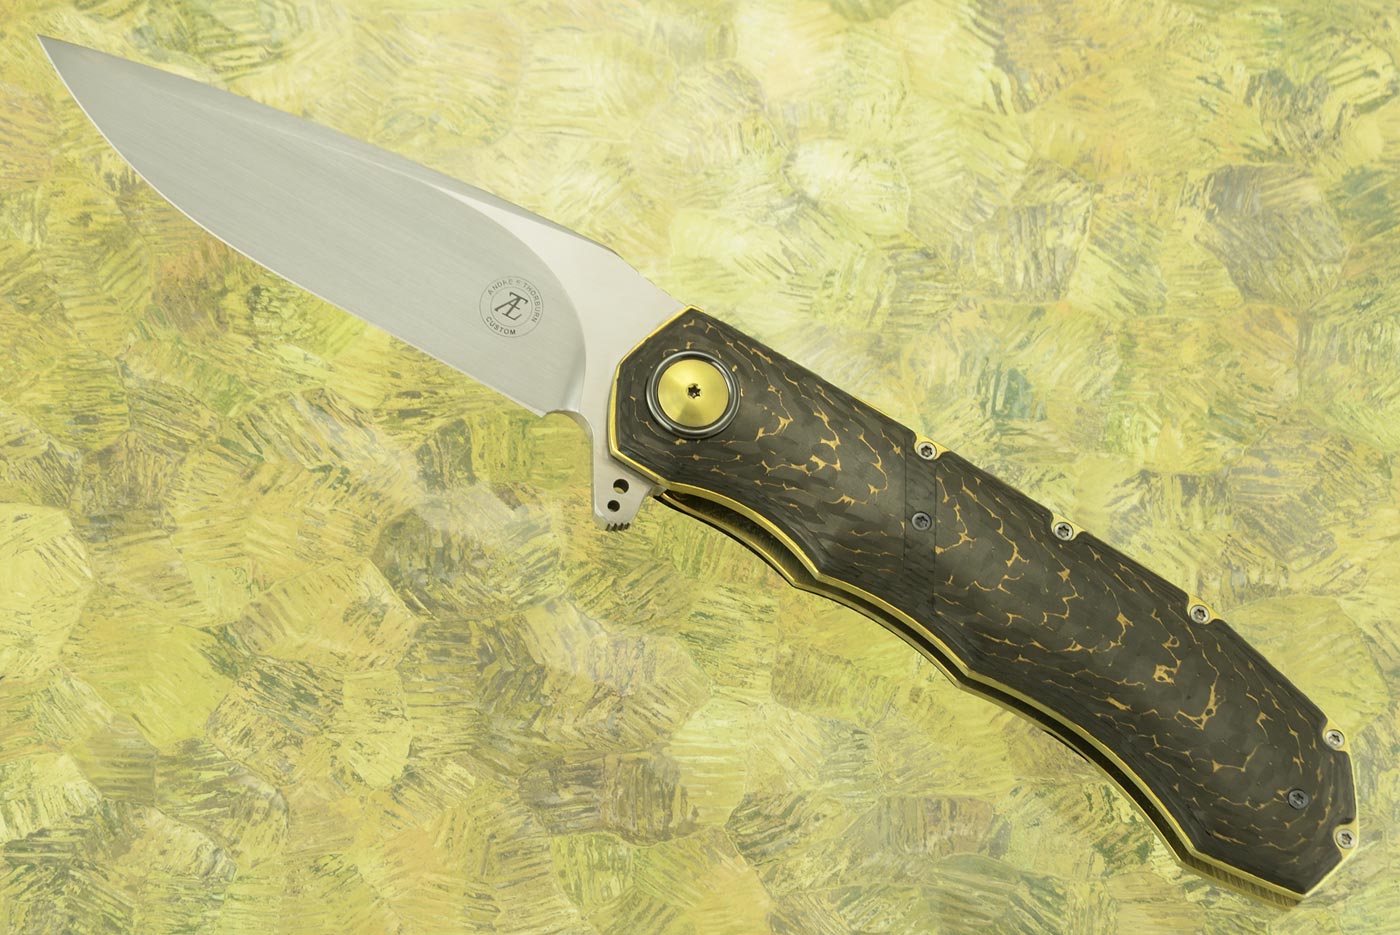 L51 Compact Flipper with Carbon Fiber and Gold Snakeskin Carbon Fiber (Ceramic IKBS) - CTS-XHP